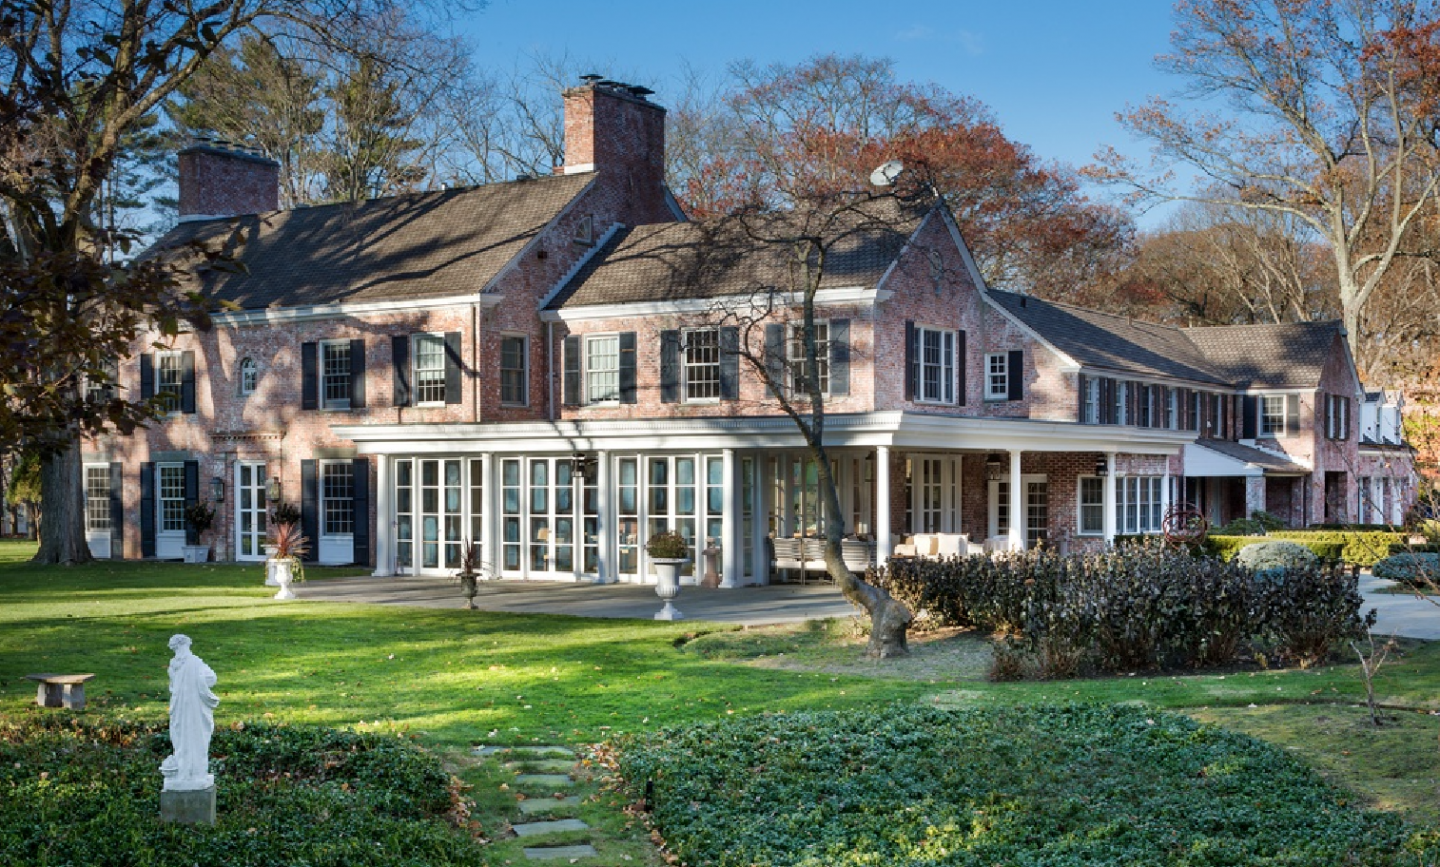 Salsa singer Marc Anthony listed the exclusive Long Island estate he shared with Jennifer Lopez for $12 million.